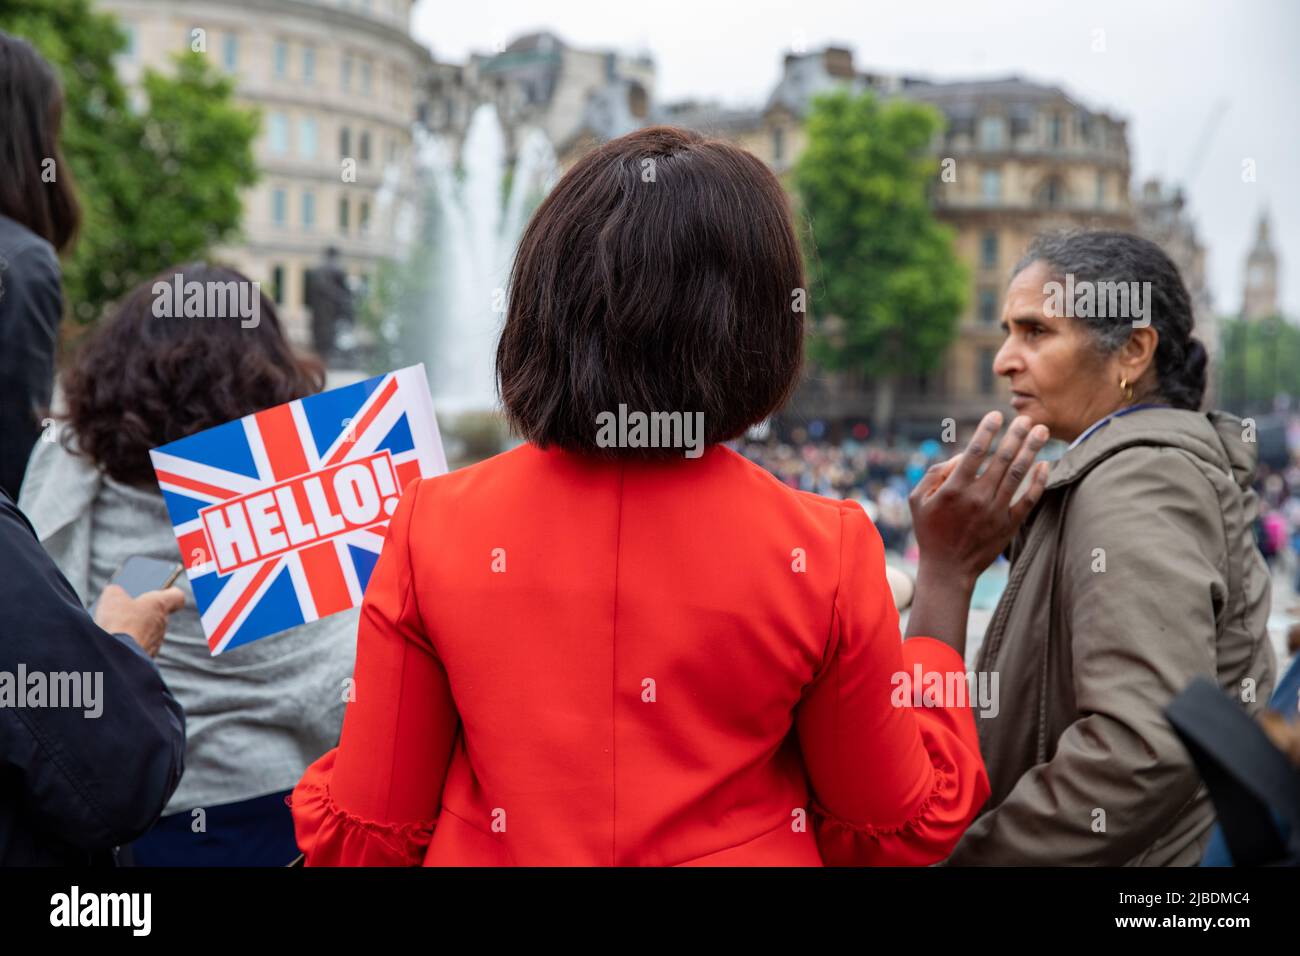 Westminster, London, UK. 5 June 2022. Royal fans congregate in the Mall and Trafalgar Square near Buckingham Palace to celebrate Her Majesty Queen Elizabeth II Platinum Jubilee. This is a weekend marking The Queen’s 70 years reign. Stock Photo